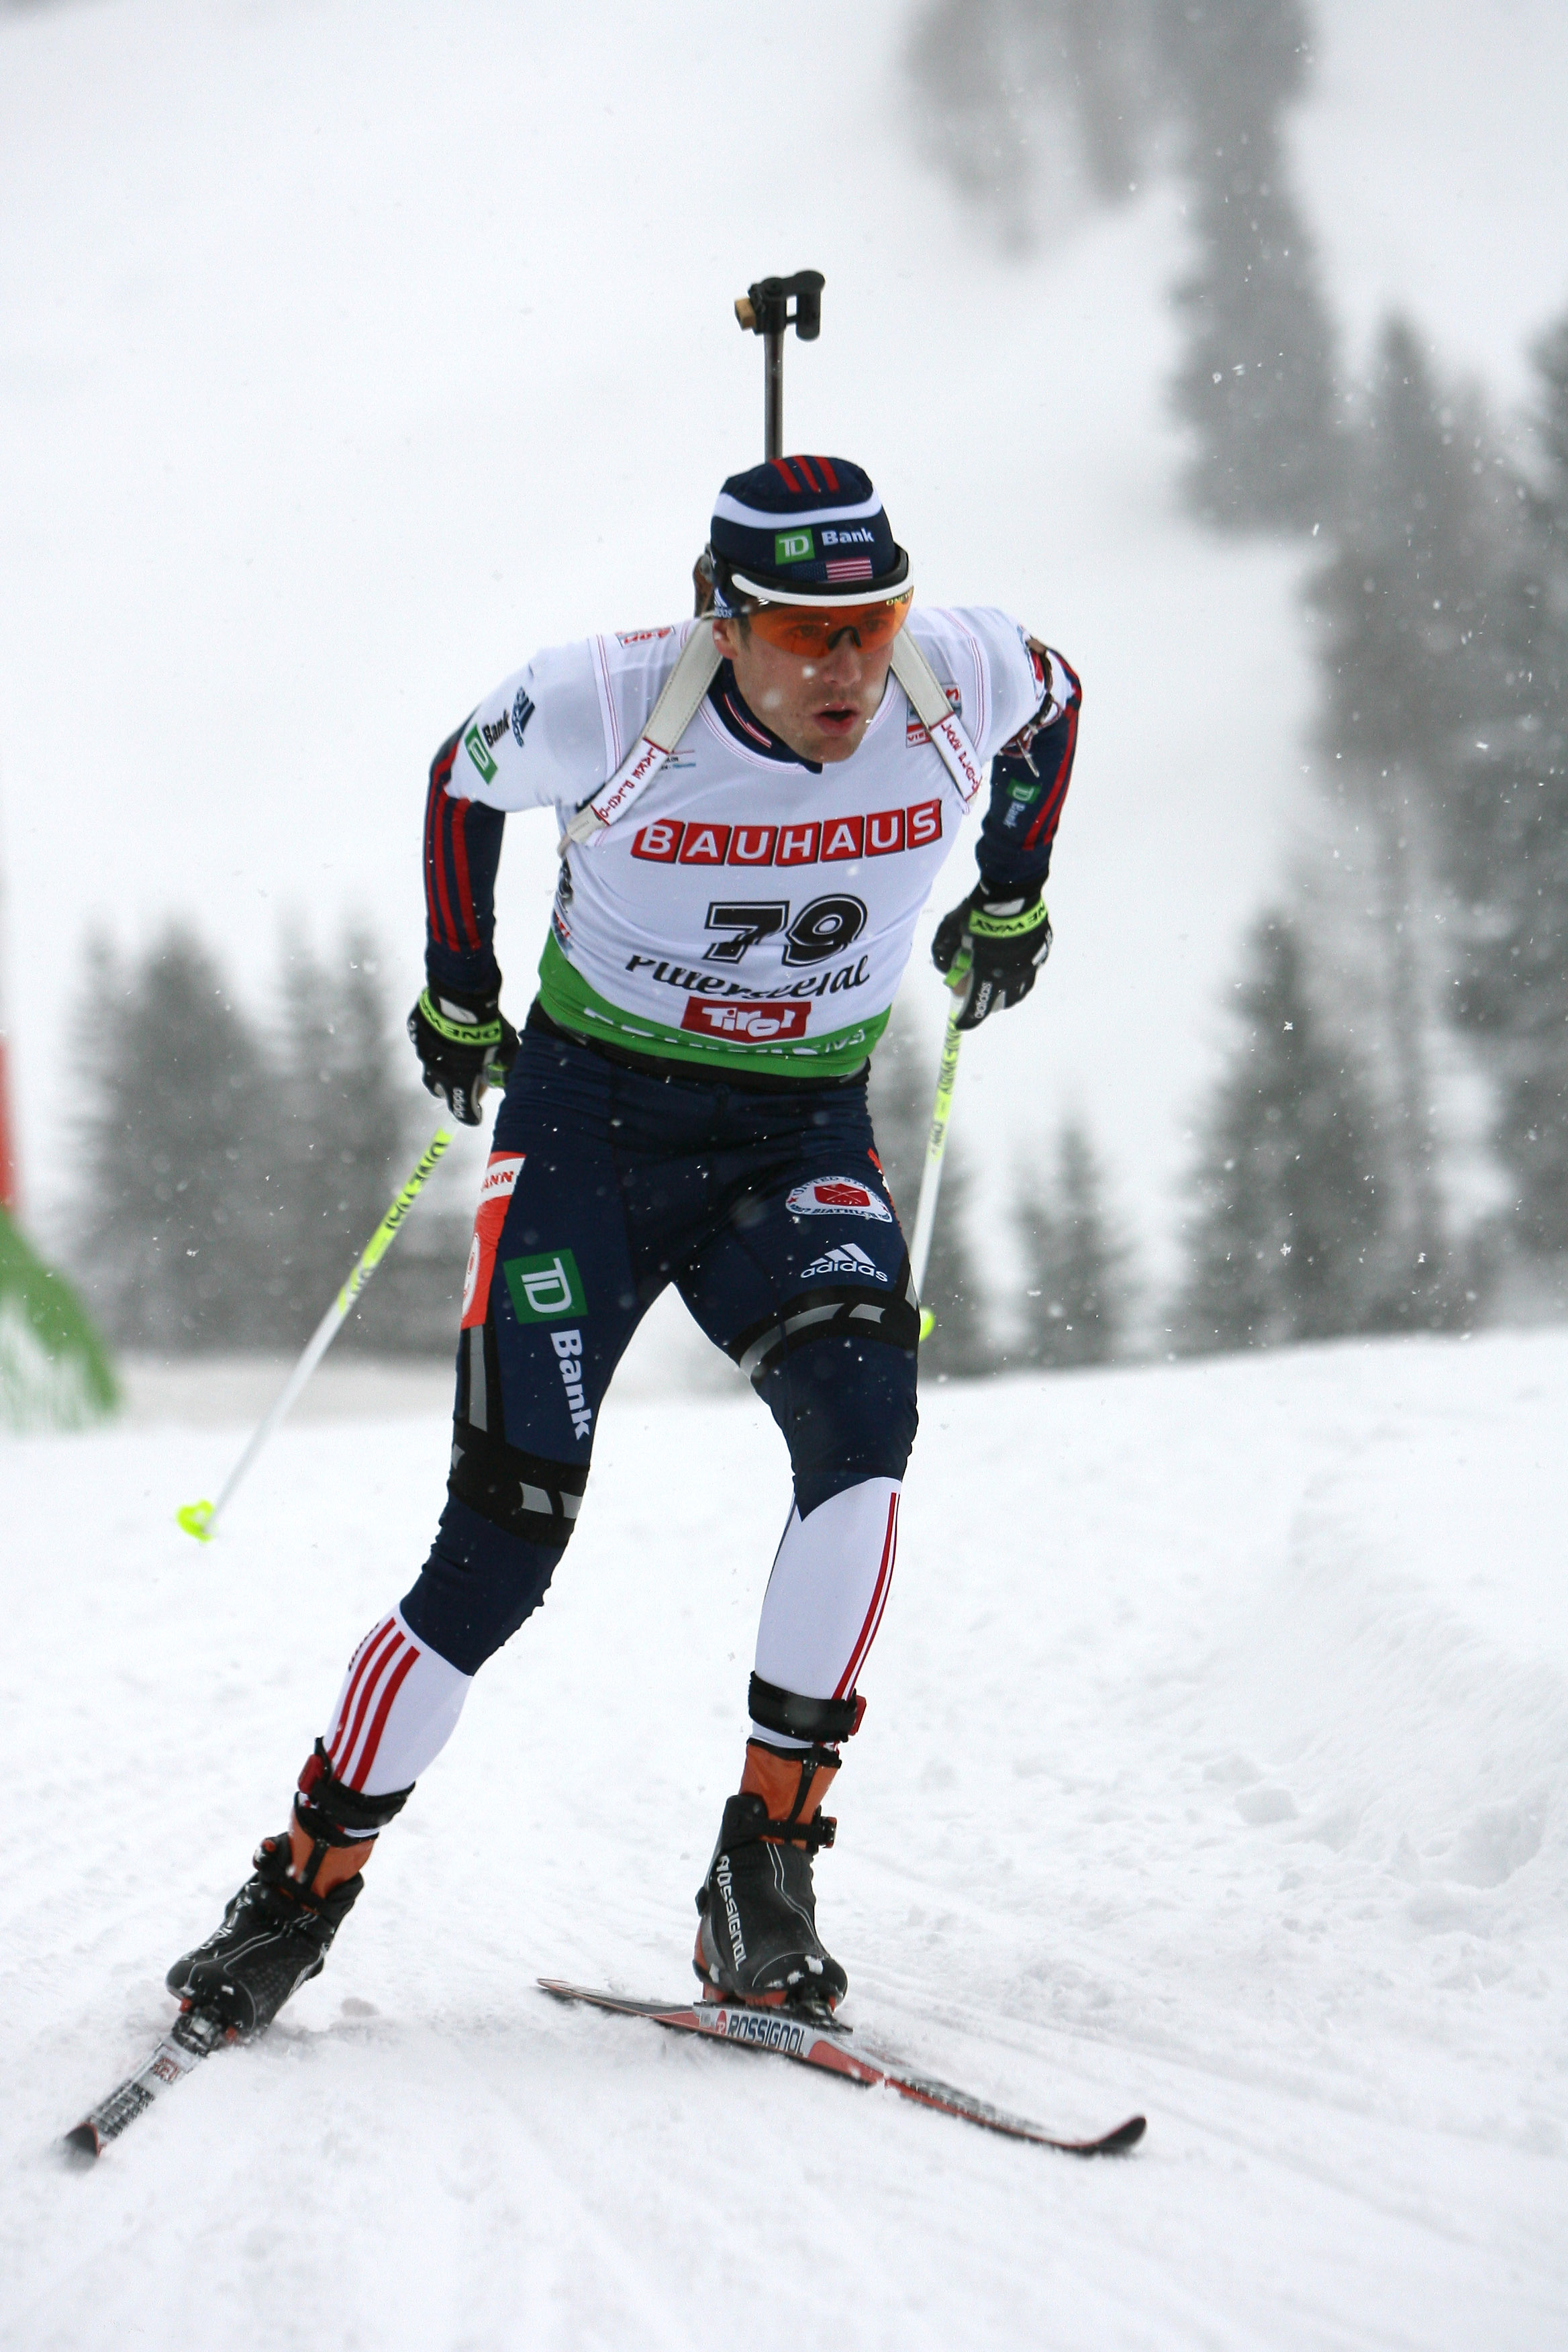 Fourth Straight Norwegian Win in Biathlon, but It’s Not Who You’d Expect